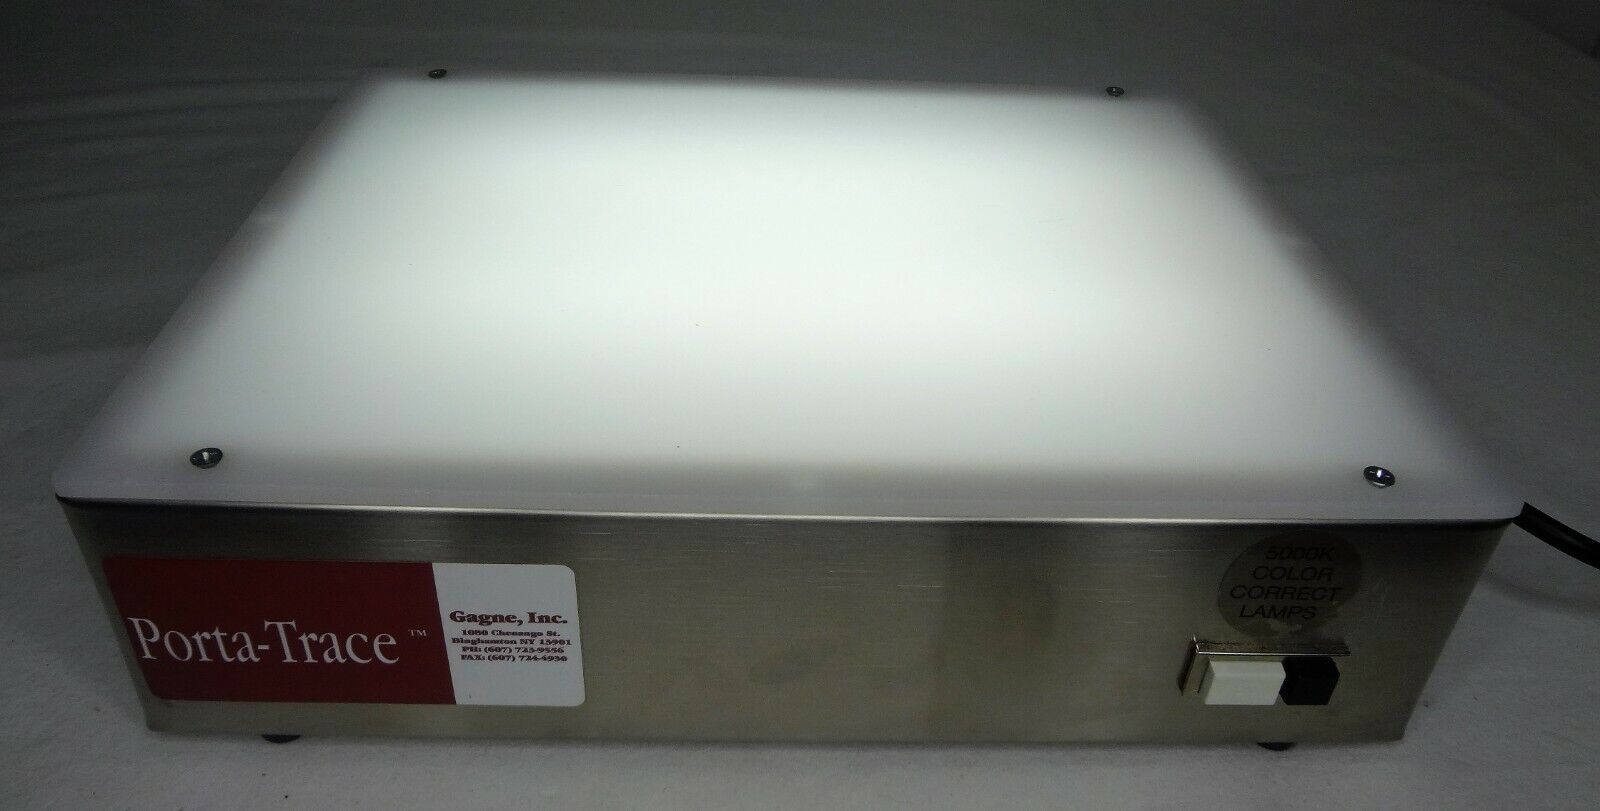 Porta-trace 334e Light Box For Art/crafts 115vac 60hz W/ Pouch--tested